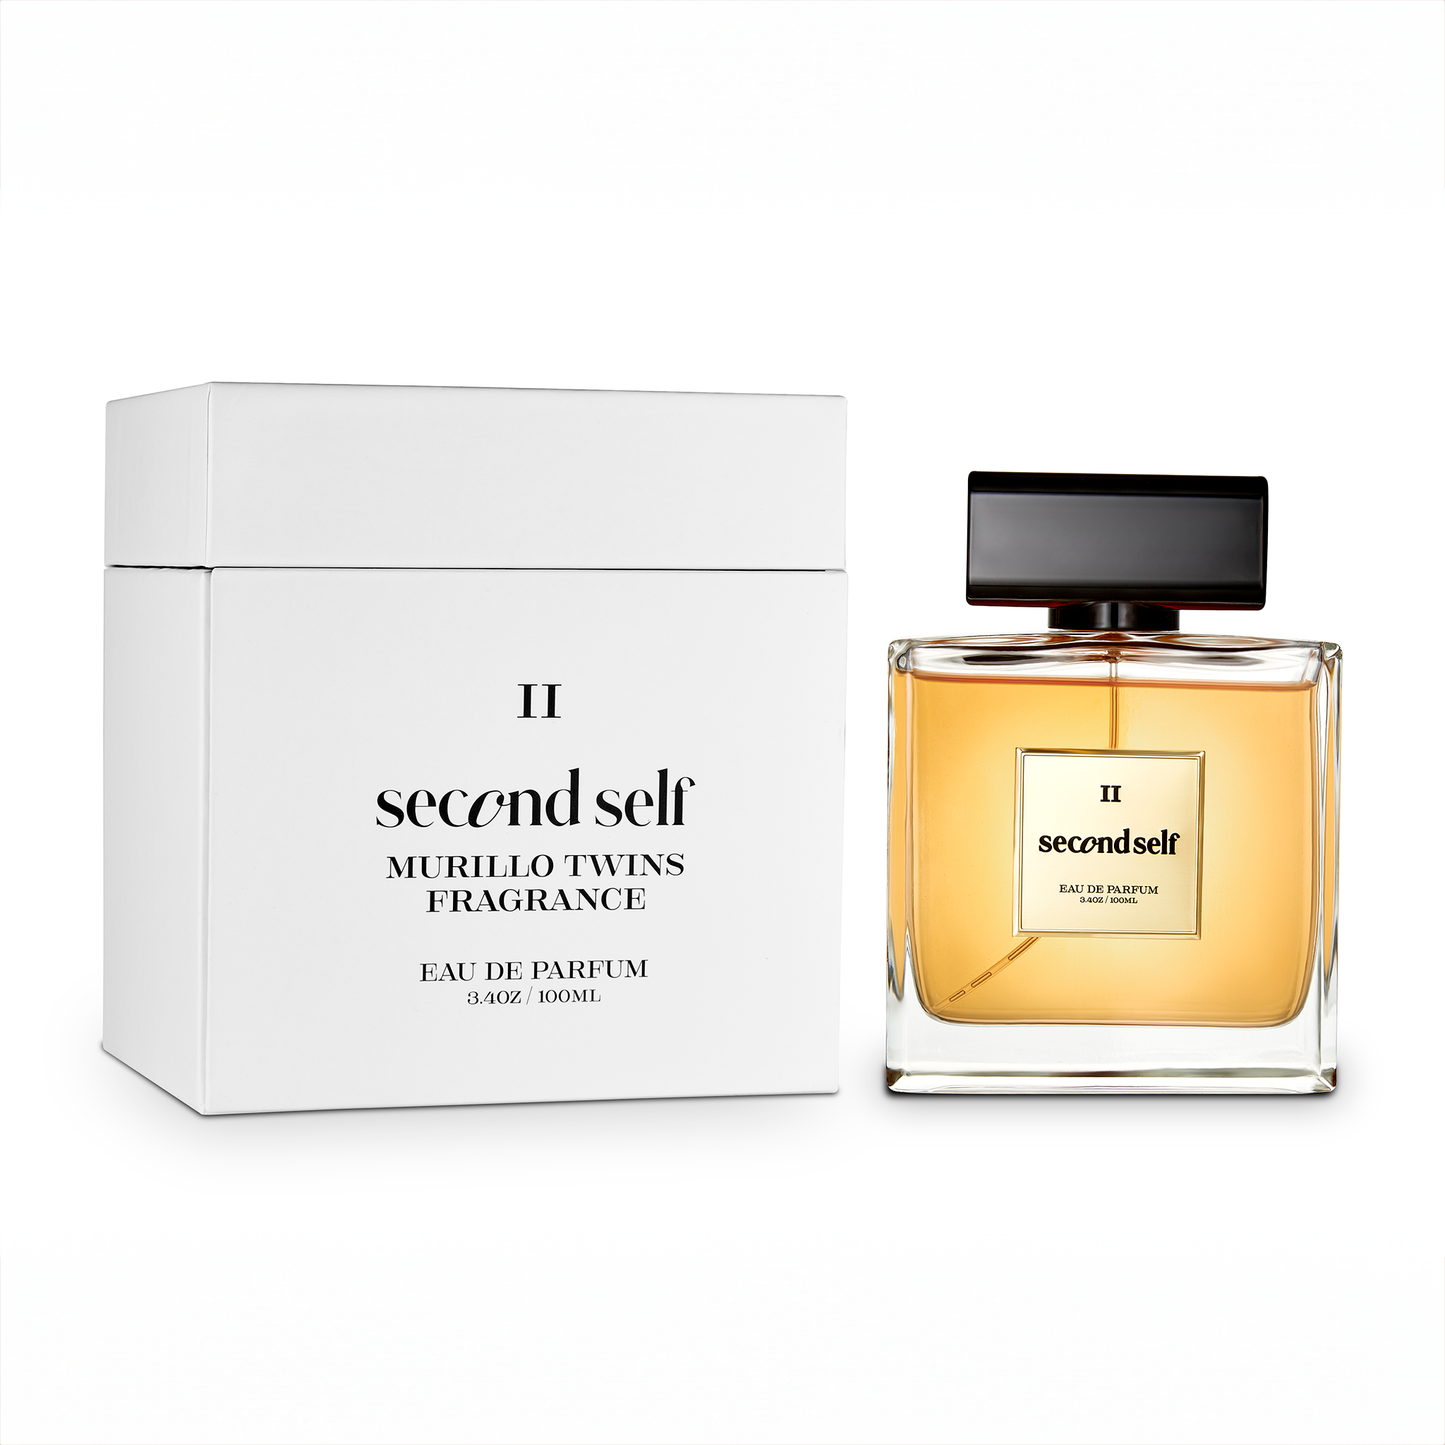 The Second Self Gift Set